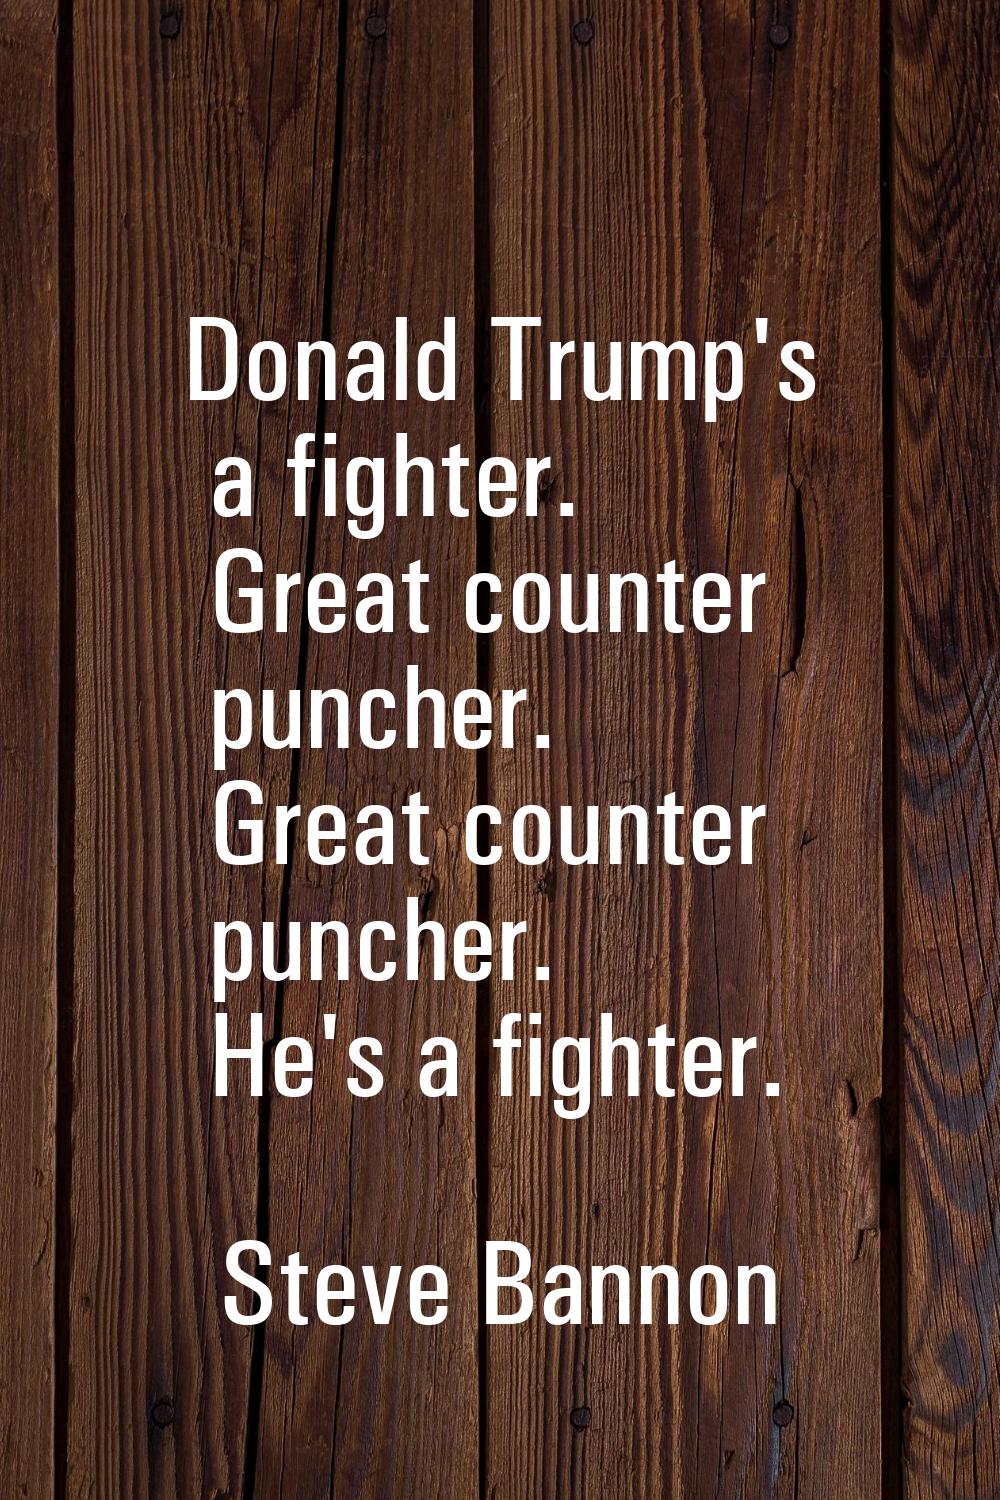 Donald Trump's a fighter. Great counter puncher. Great counter puncher. He's a fighter.